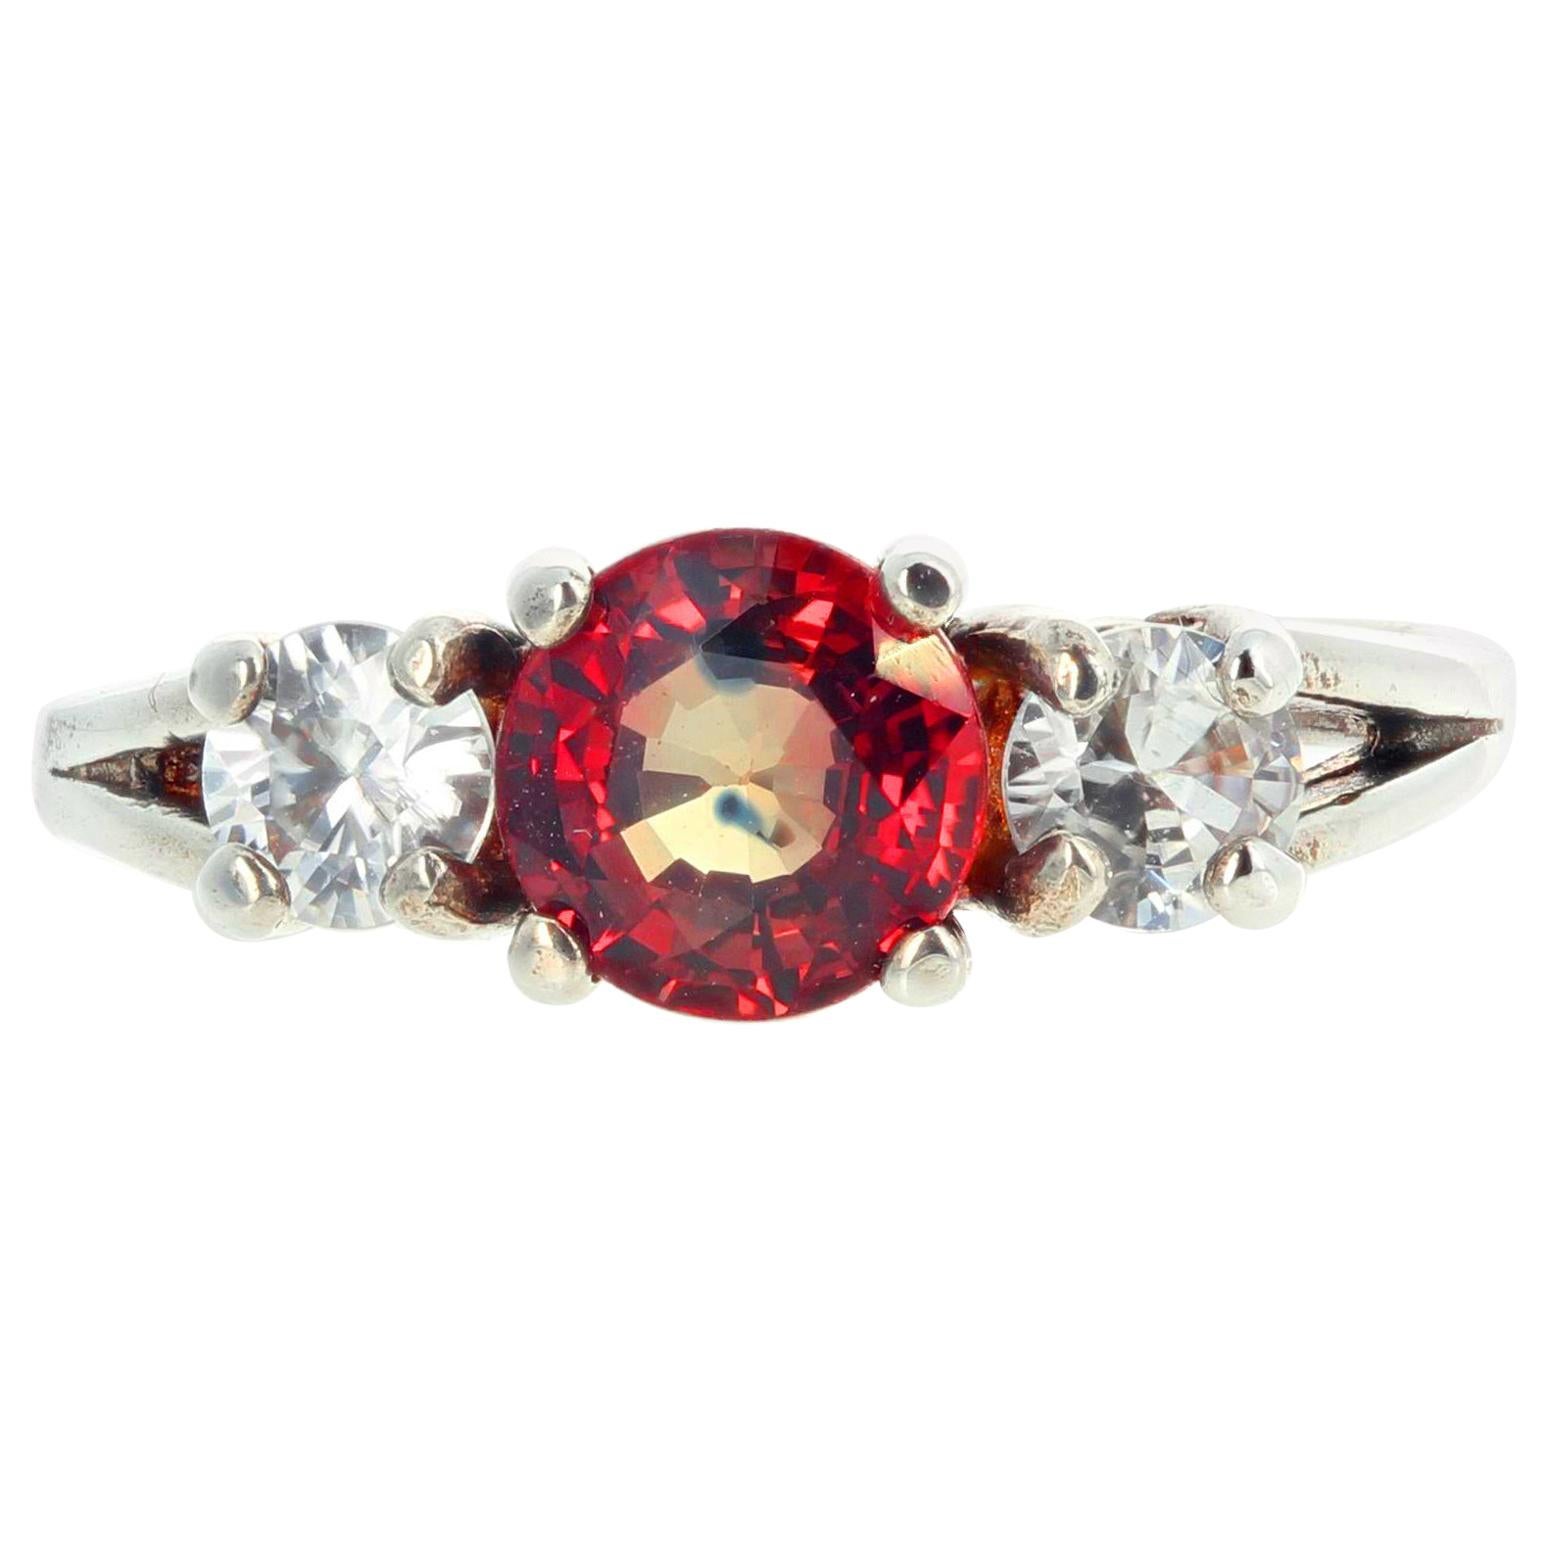 AJD Rare Fiery Songea Sapphire and White Sapphire Sterling Silver Ring